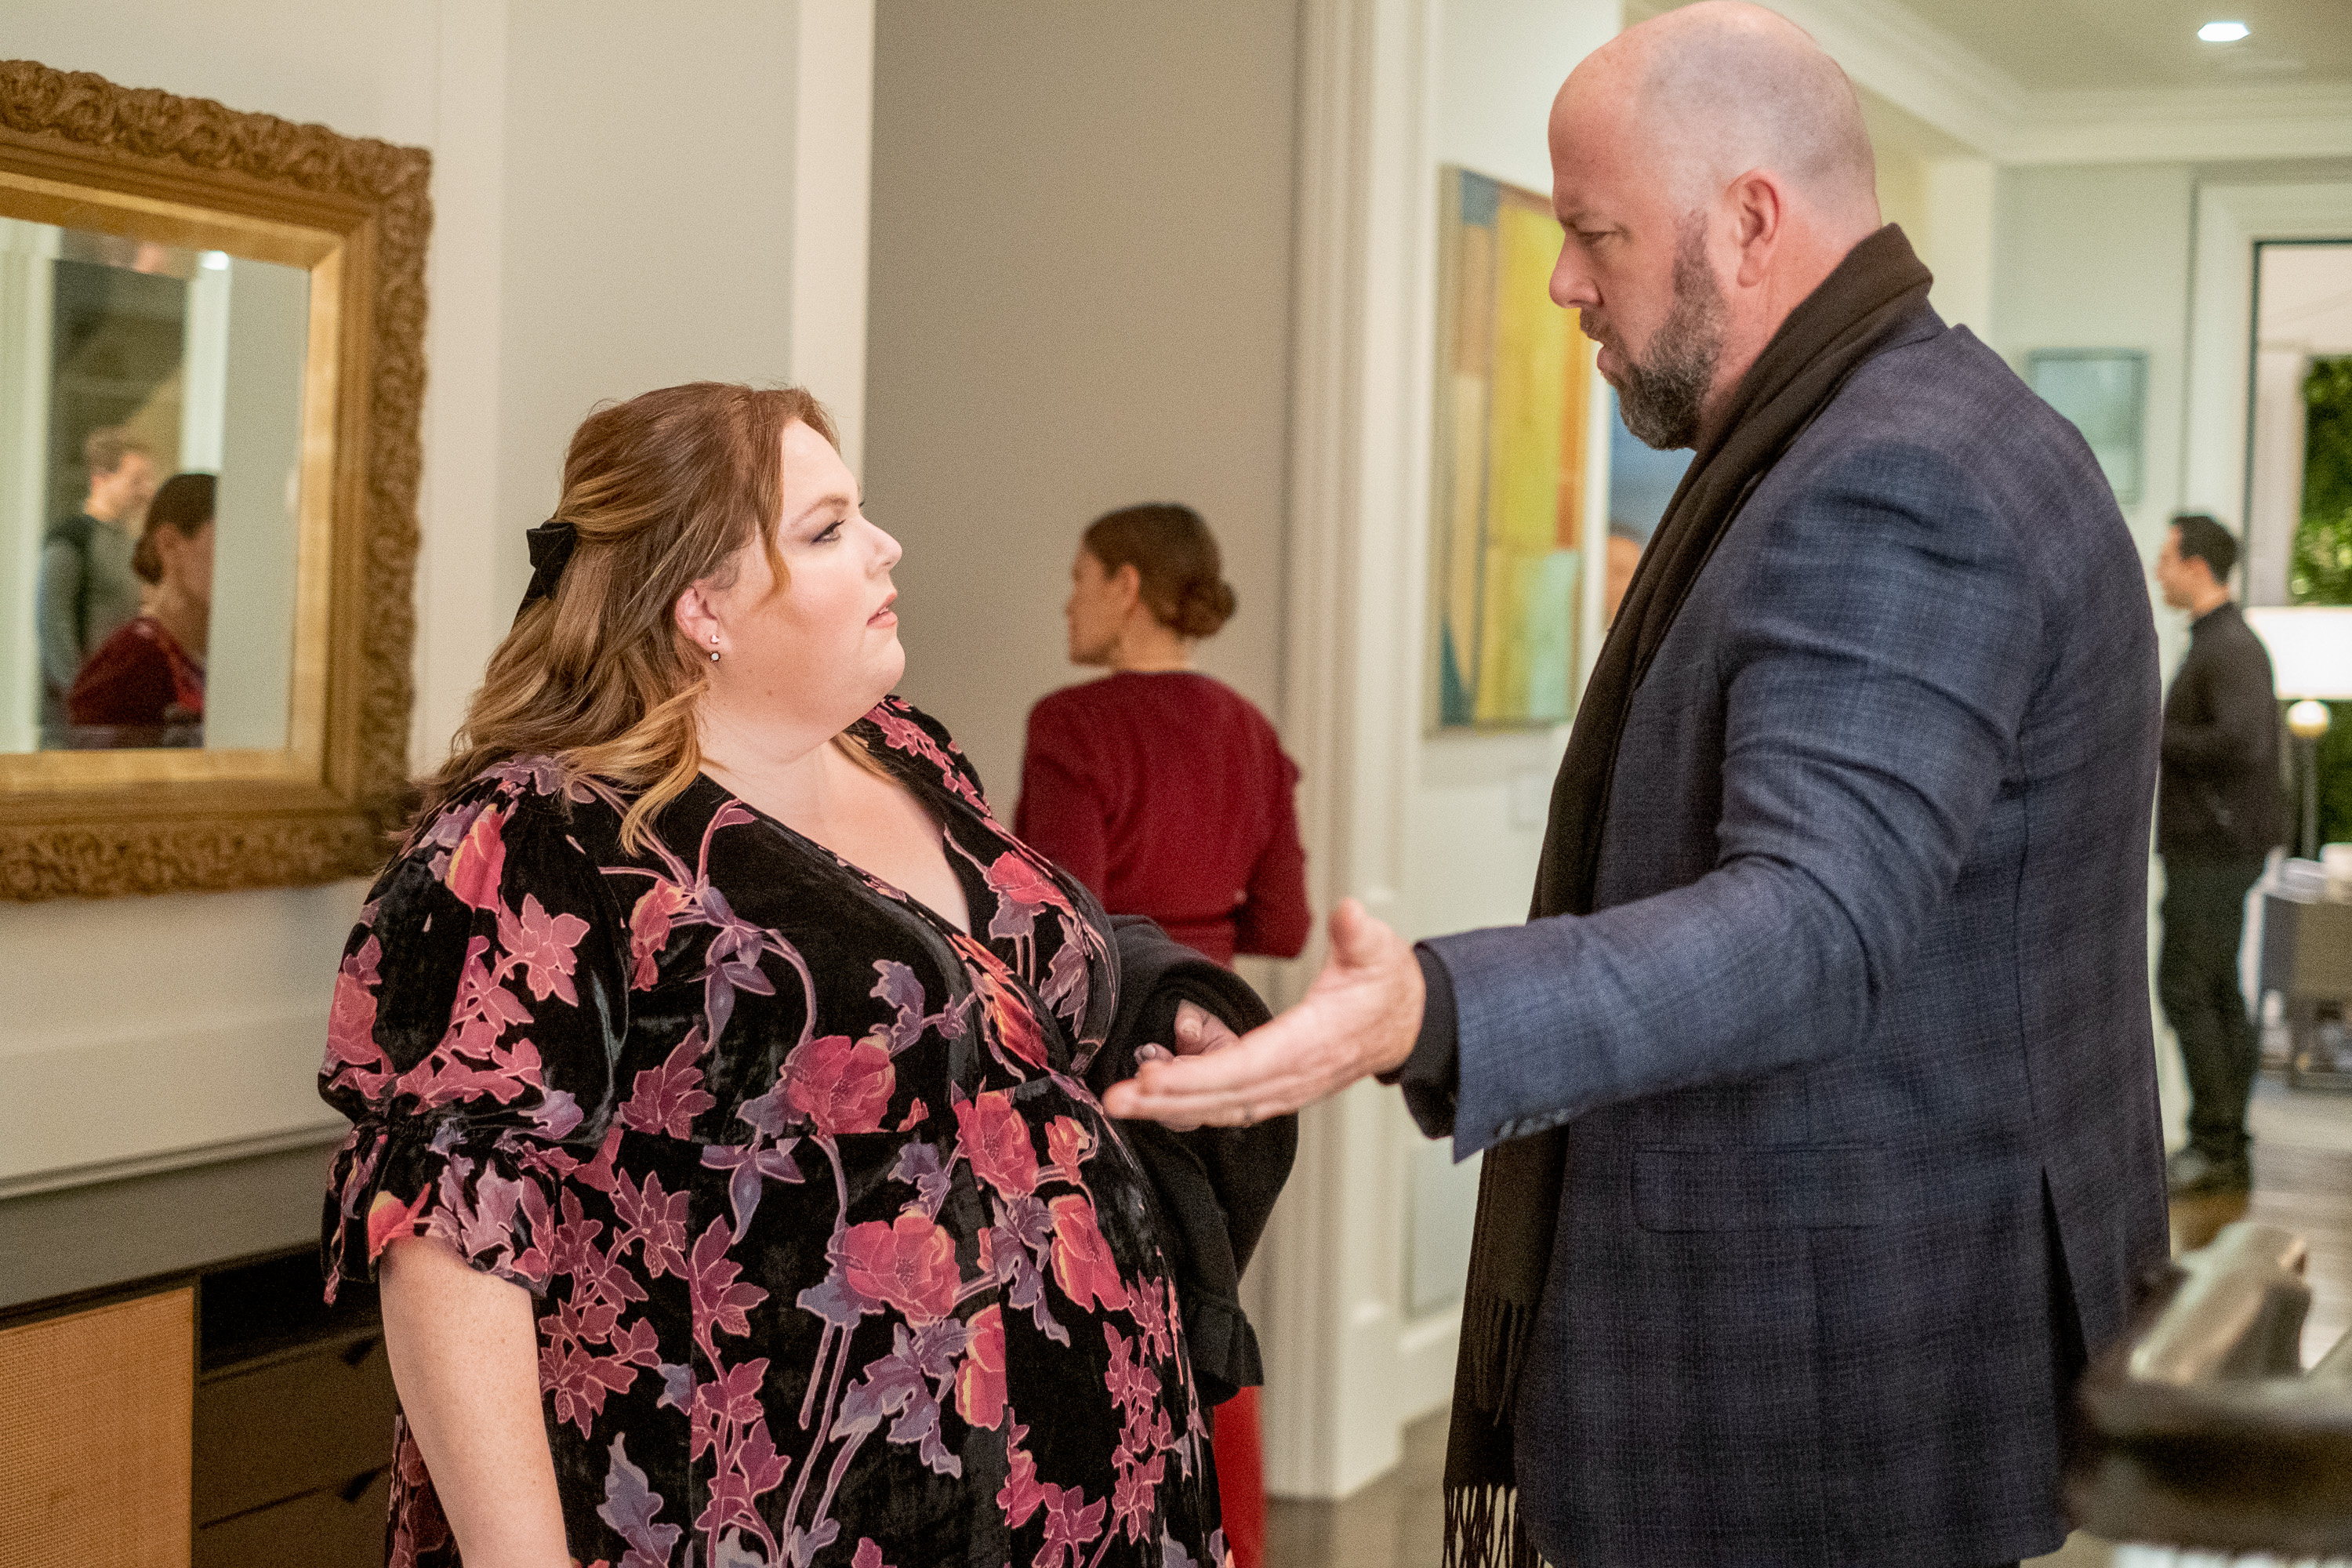 'This Is Us' stars Chrissy Metz and Chris Sullivan, in character as Kate and Toby, share a scene. Kate wears a black dress with pink and purple flowers. Toby wears a dark blue plaid coat and brown scarf.